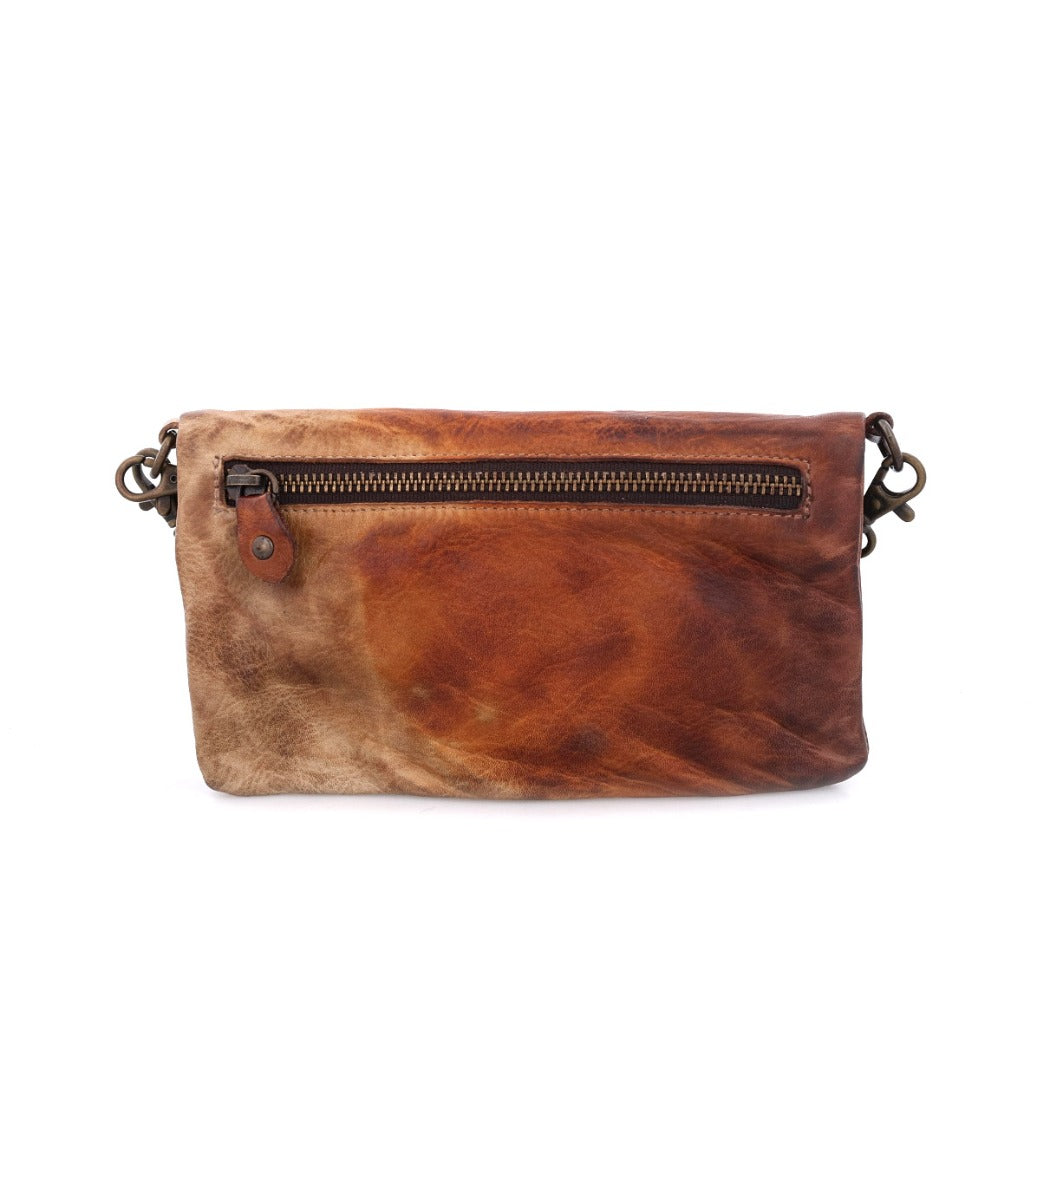 A brown and tan leather Cadence cross body bag by Bed Stu.